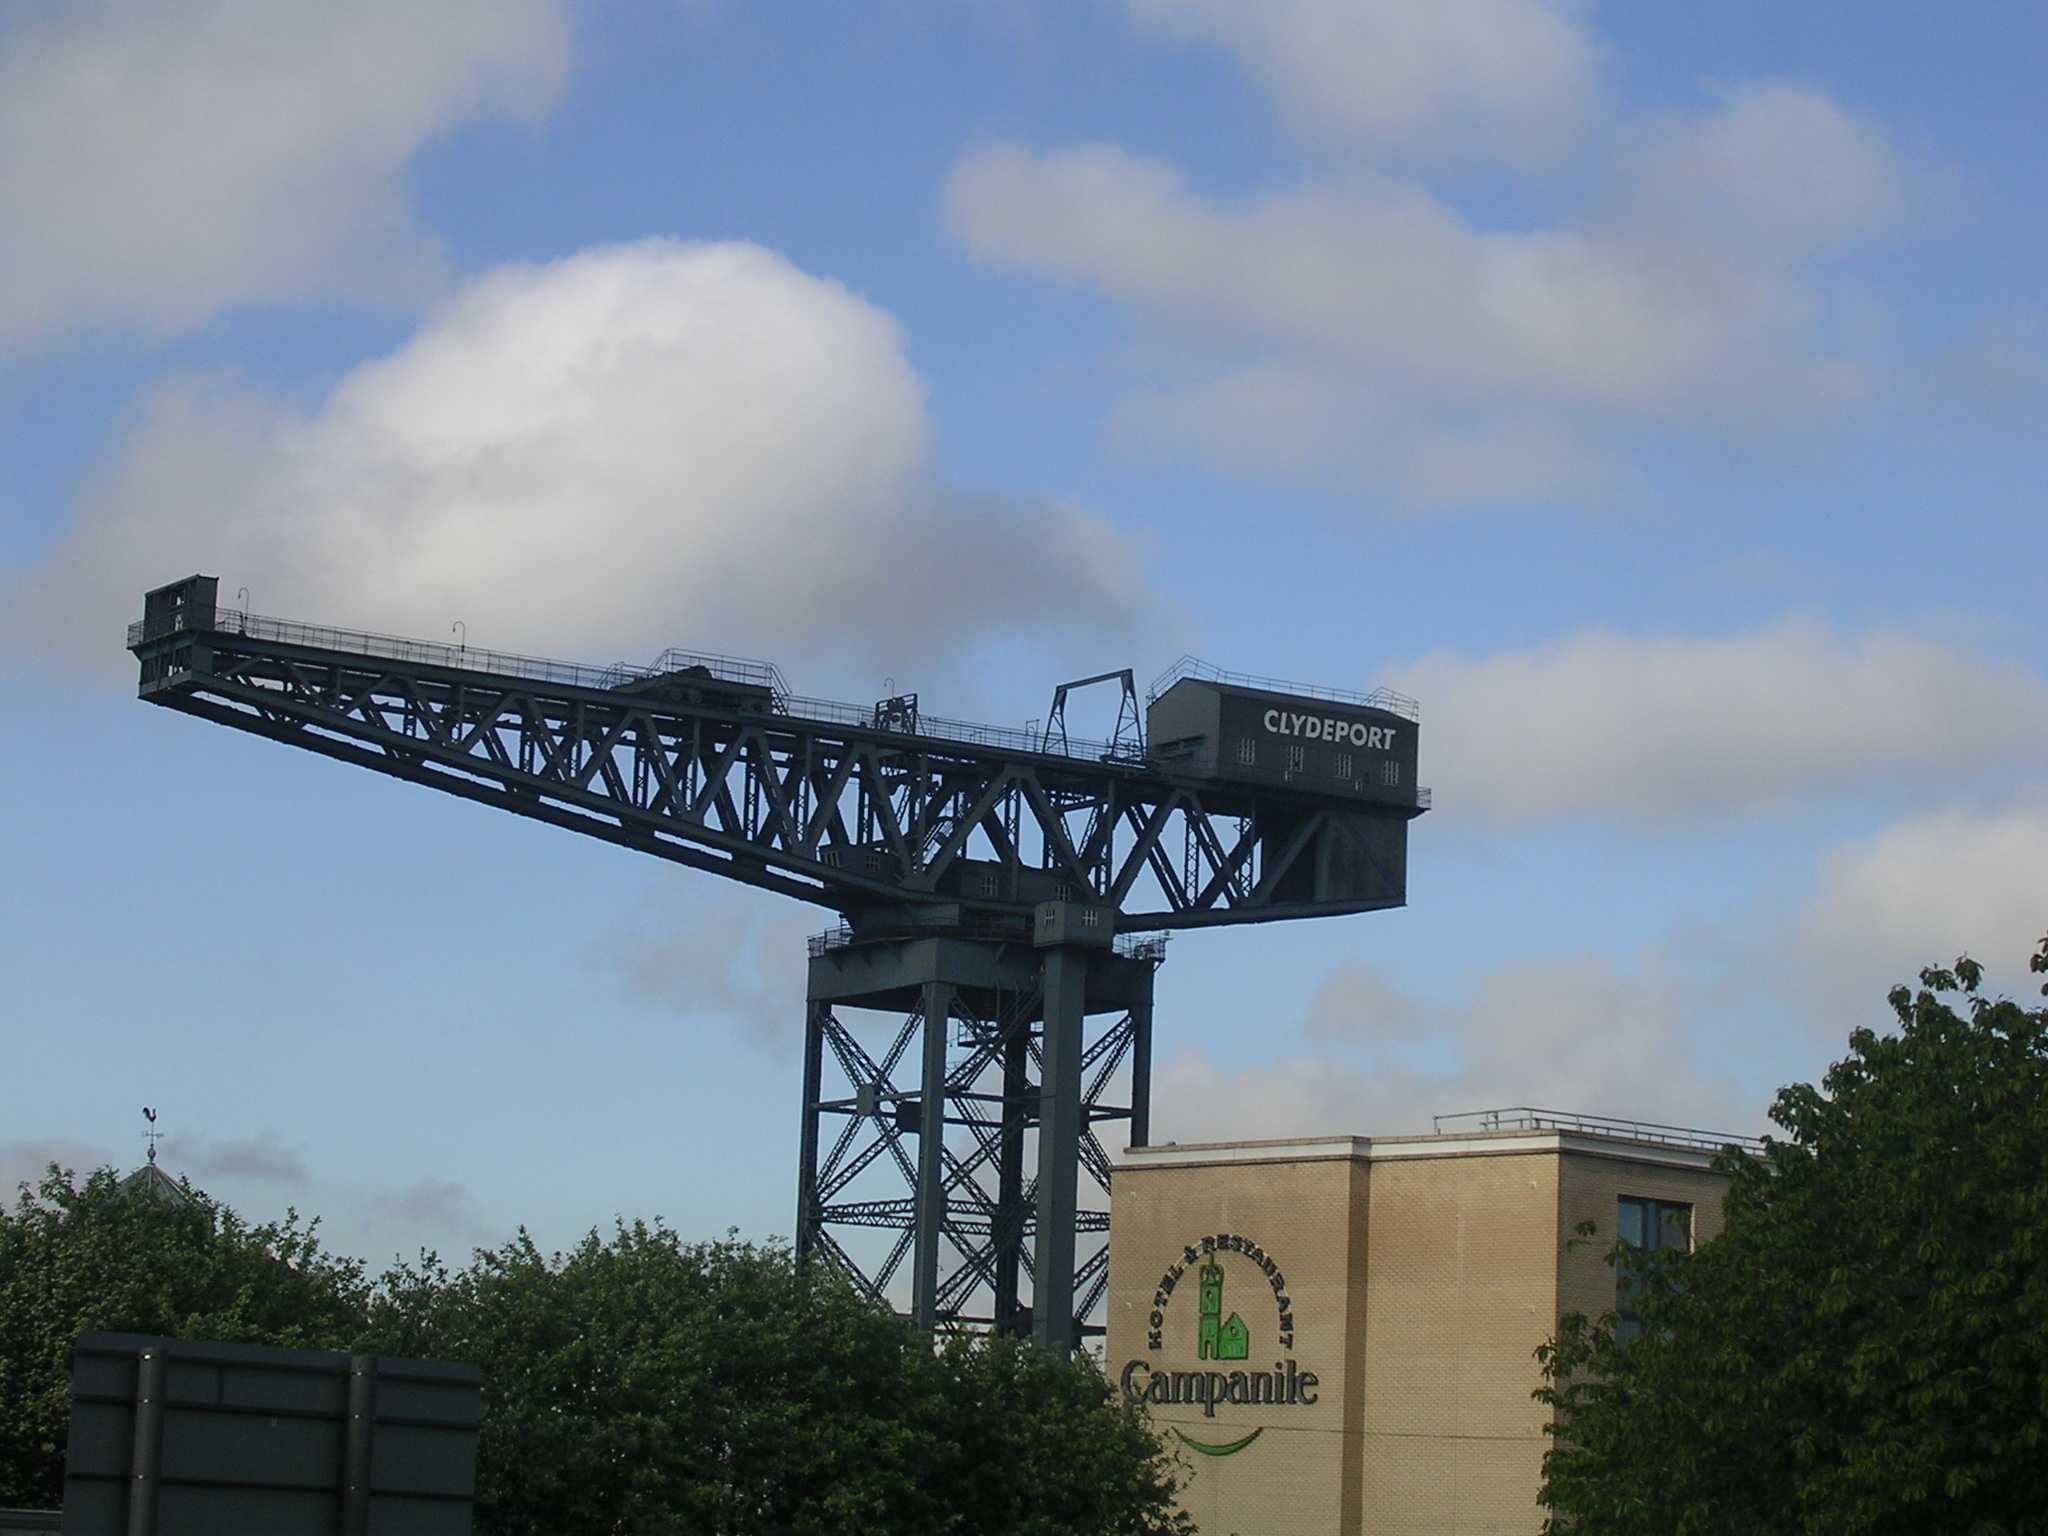 Clydeport Crane & the Campanile Hotel